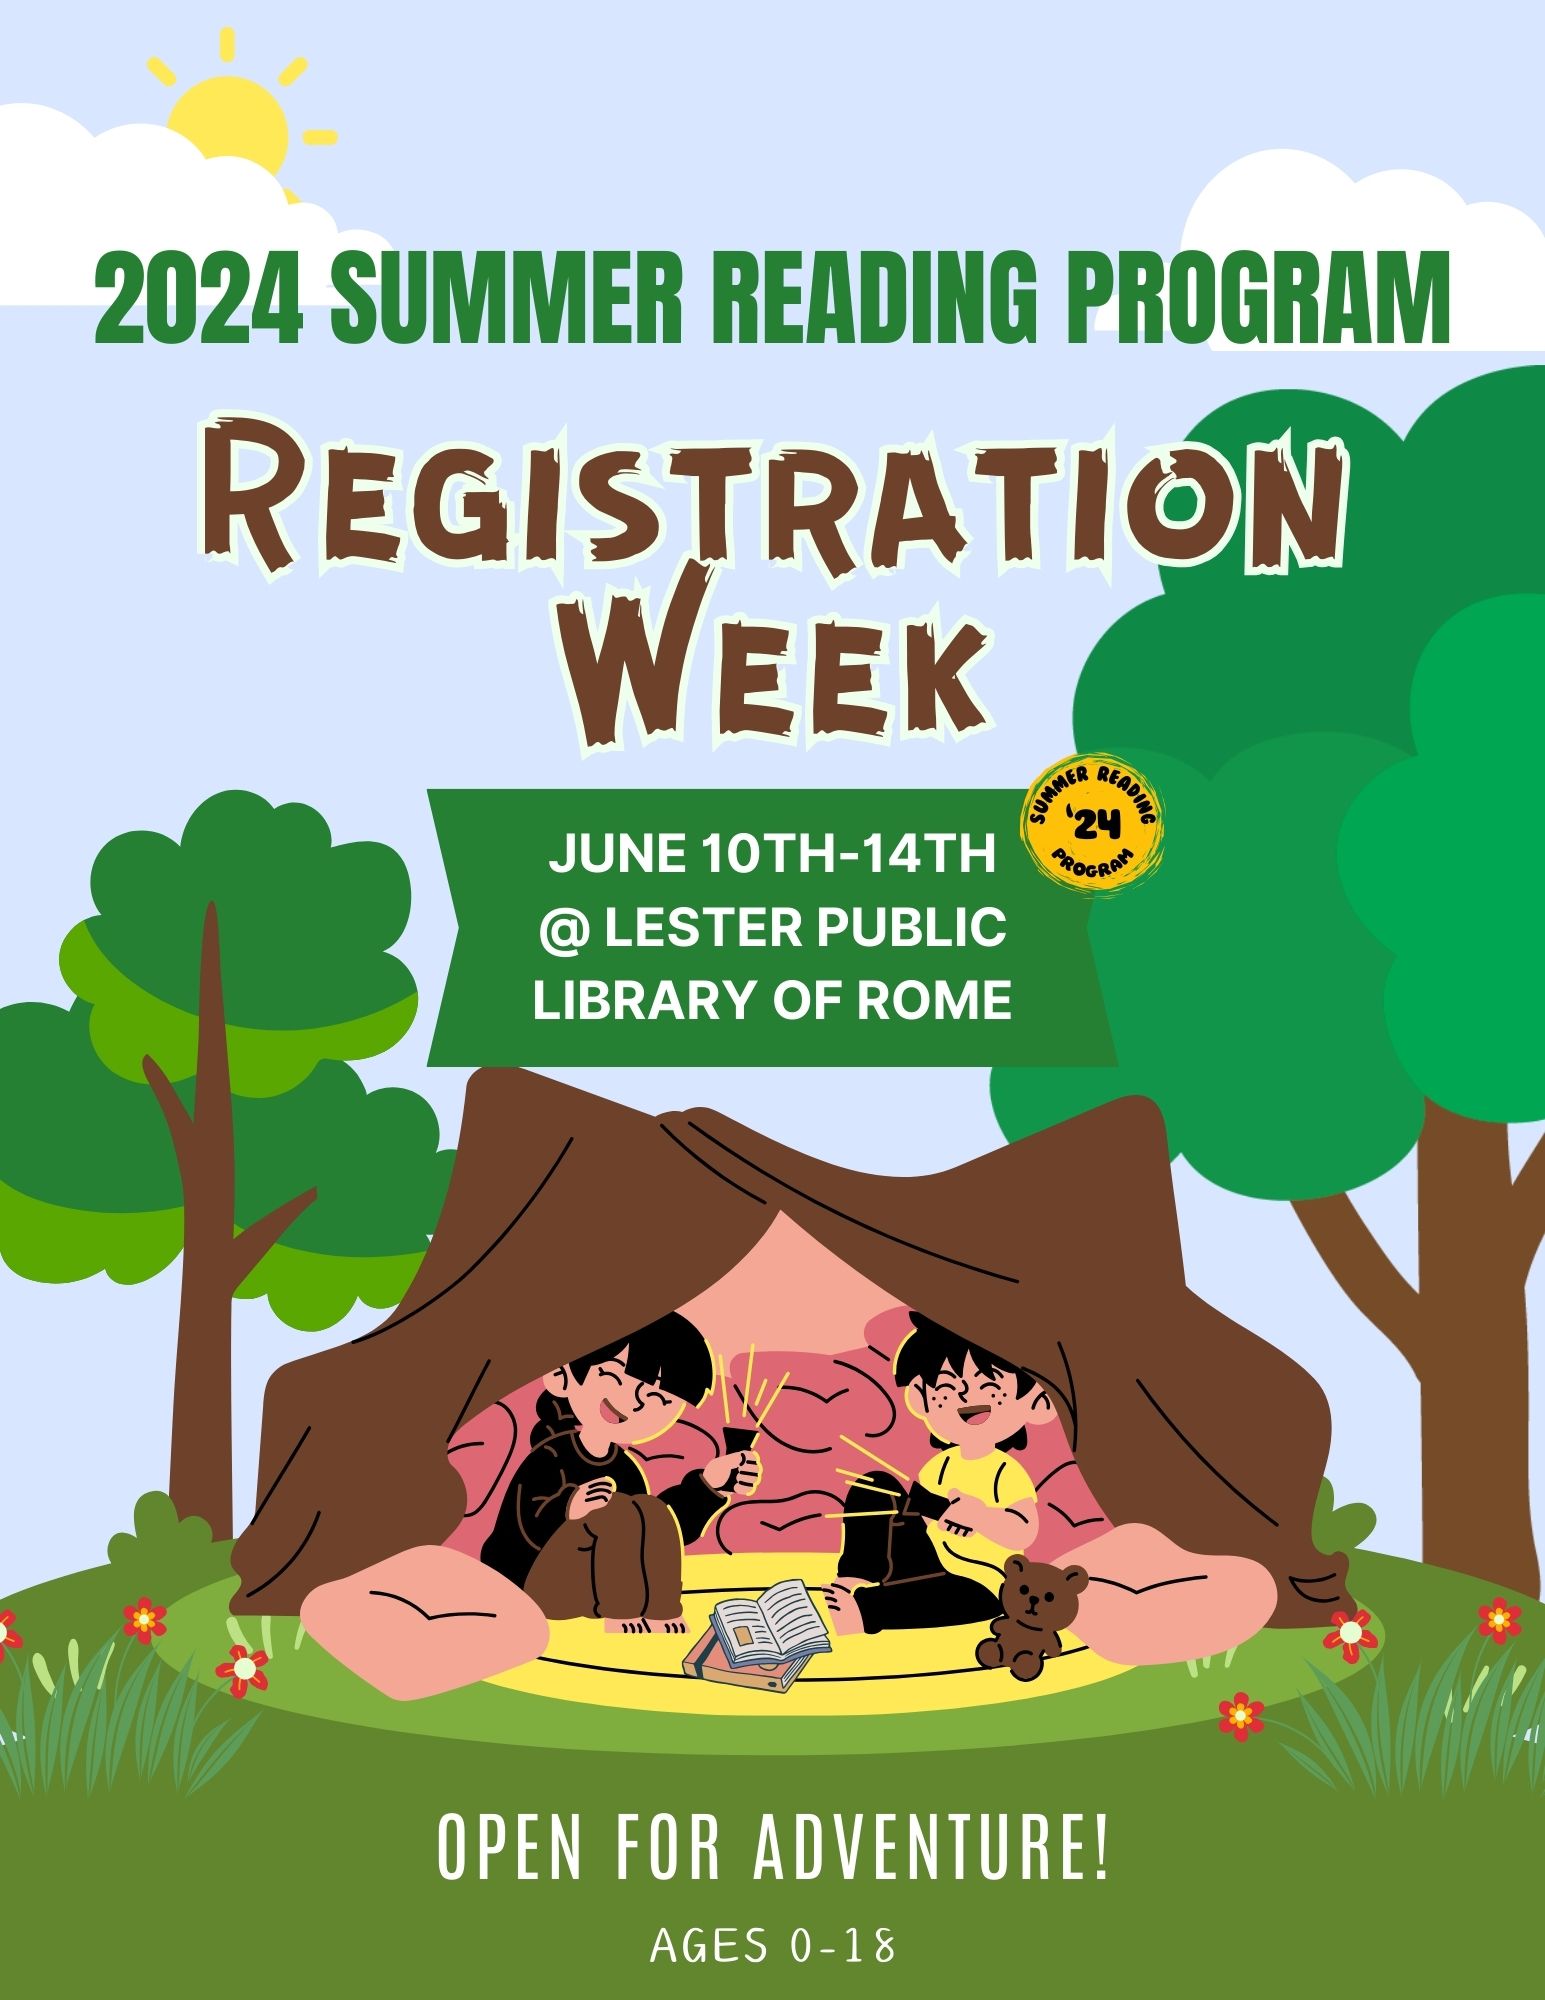 Registration Week June 10th-June 14th @ Lester Public Library of Rome. Must be between the ages of 0-18.